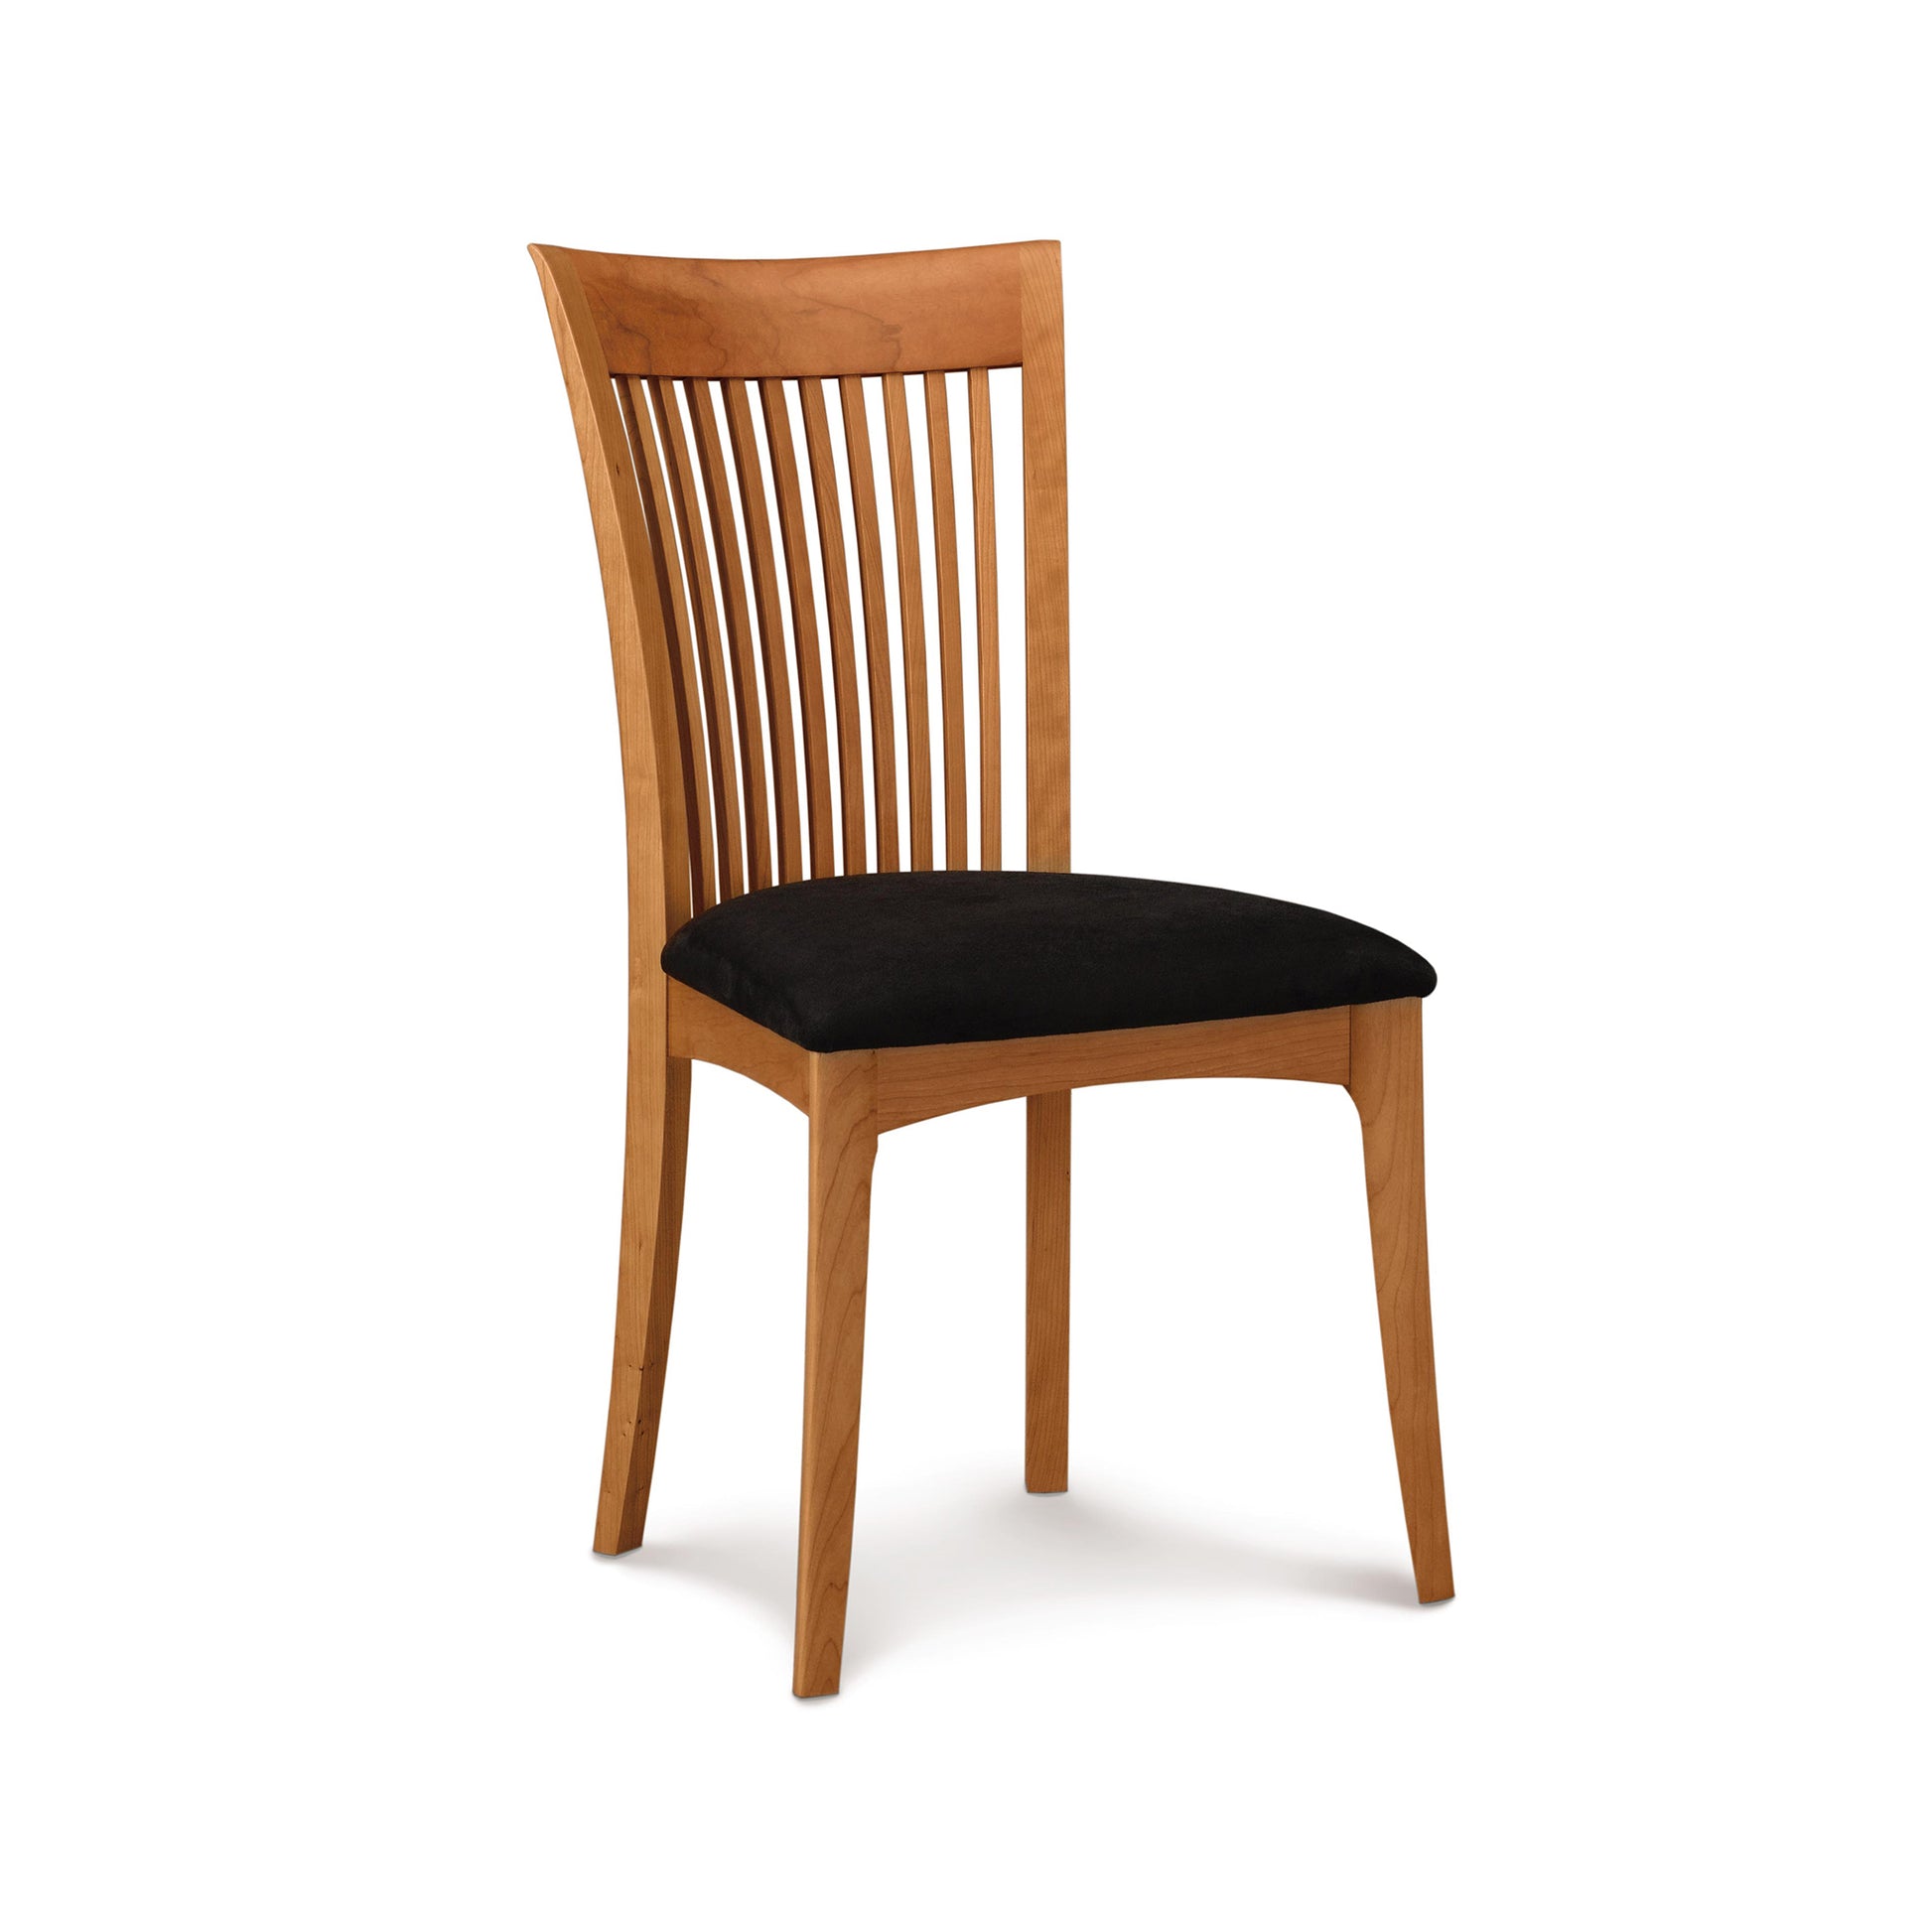 A Copeland Furniture Sarah Shaker Chair in American cherry wood with a black seat and back.